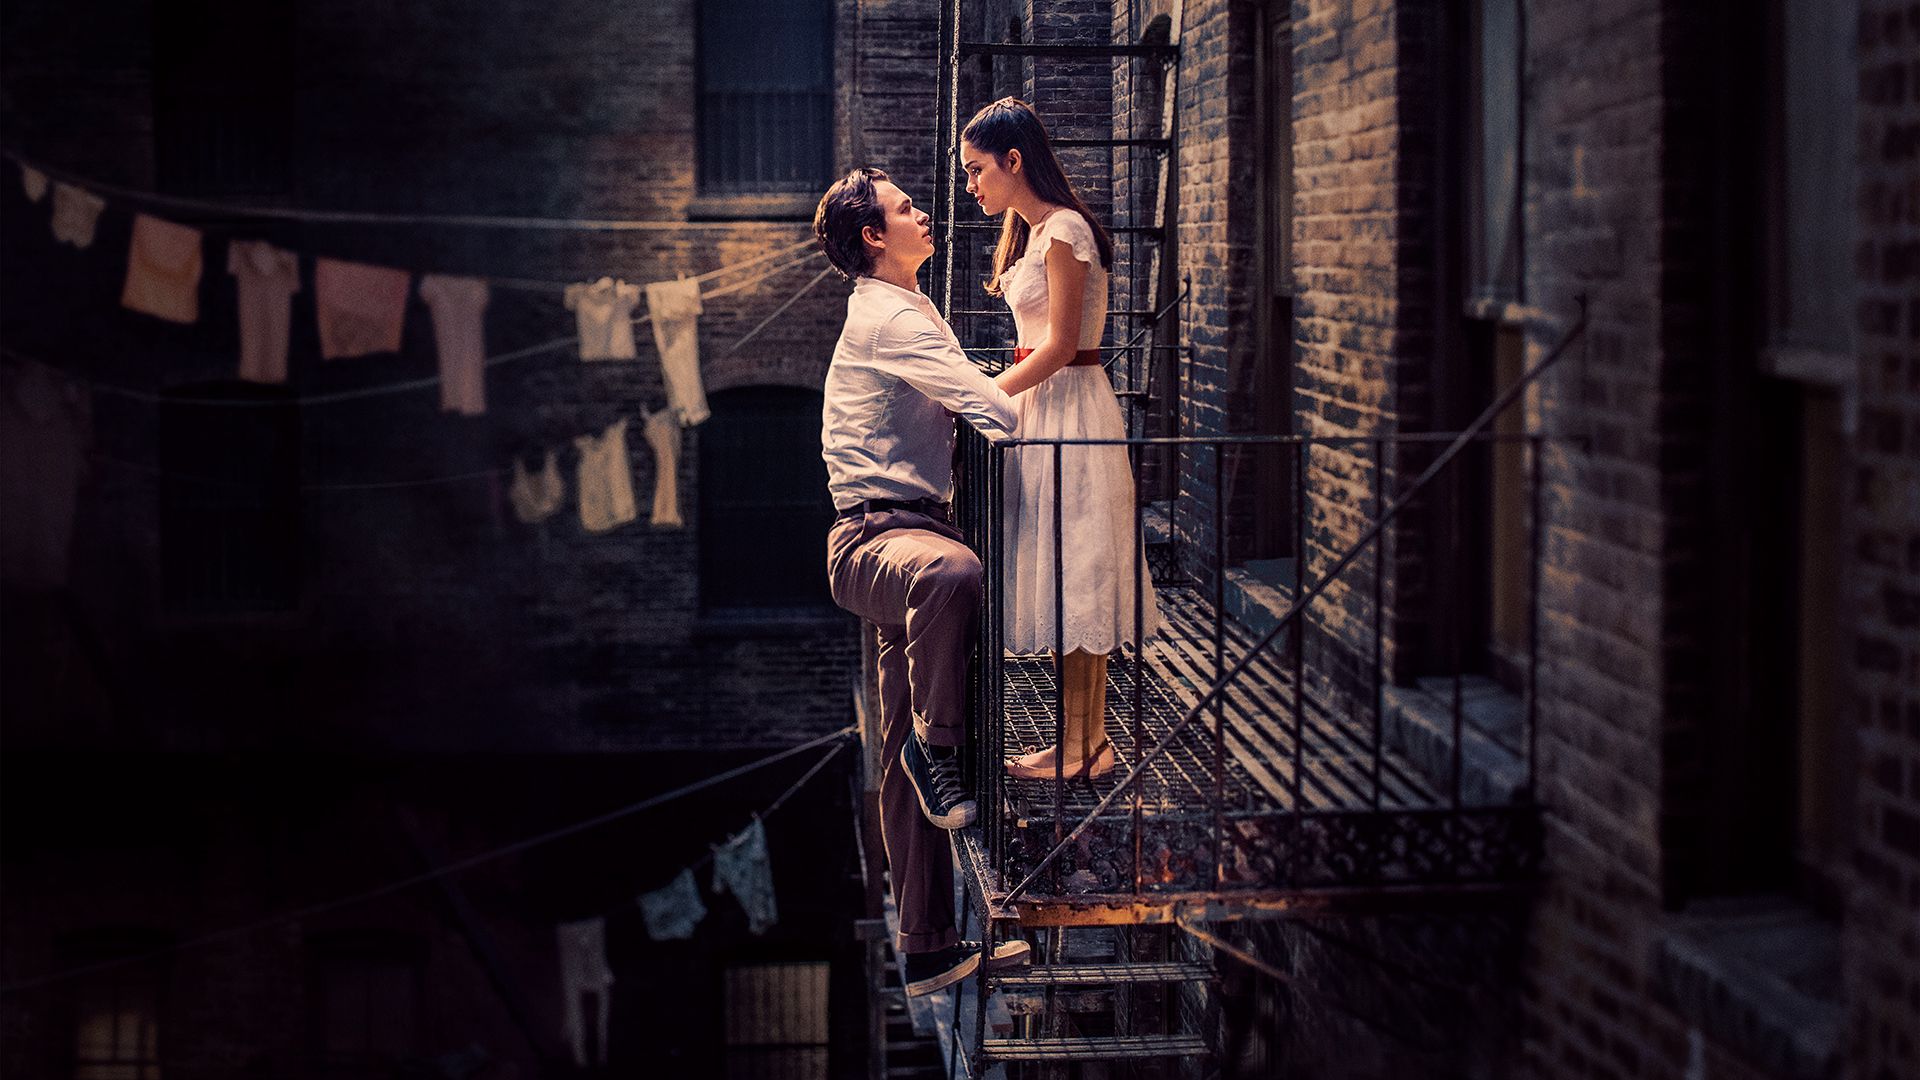 West Side Story background